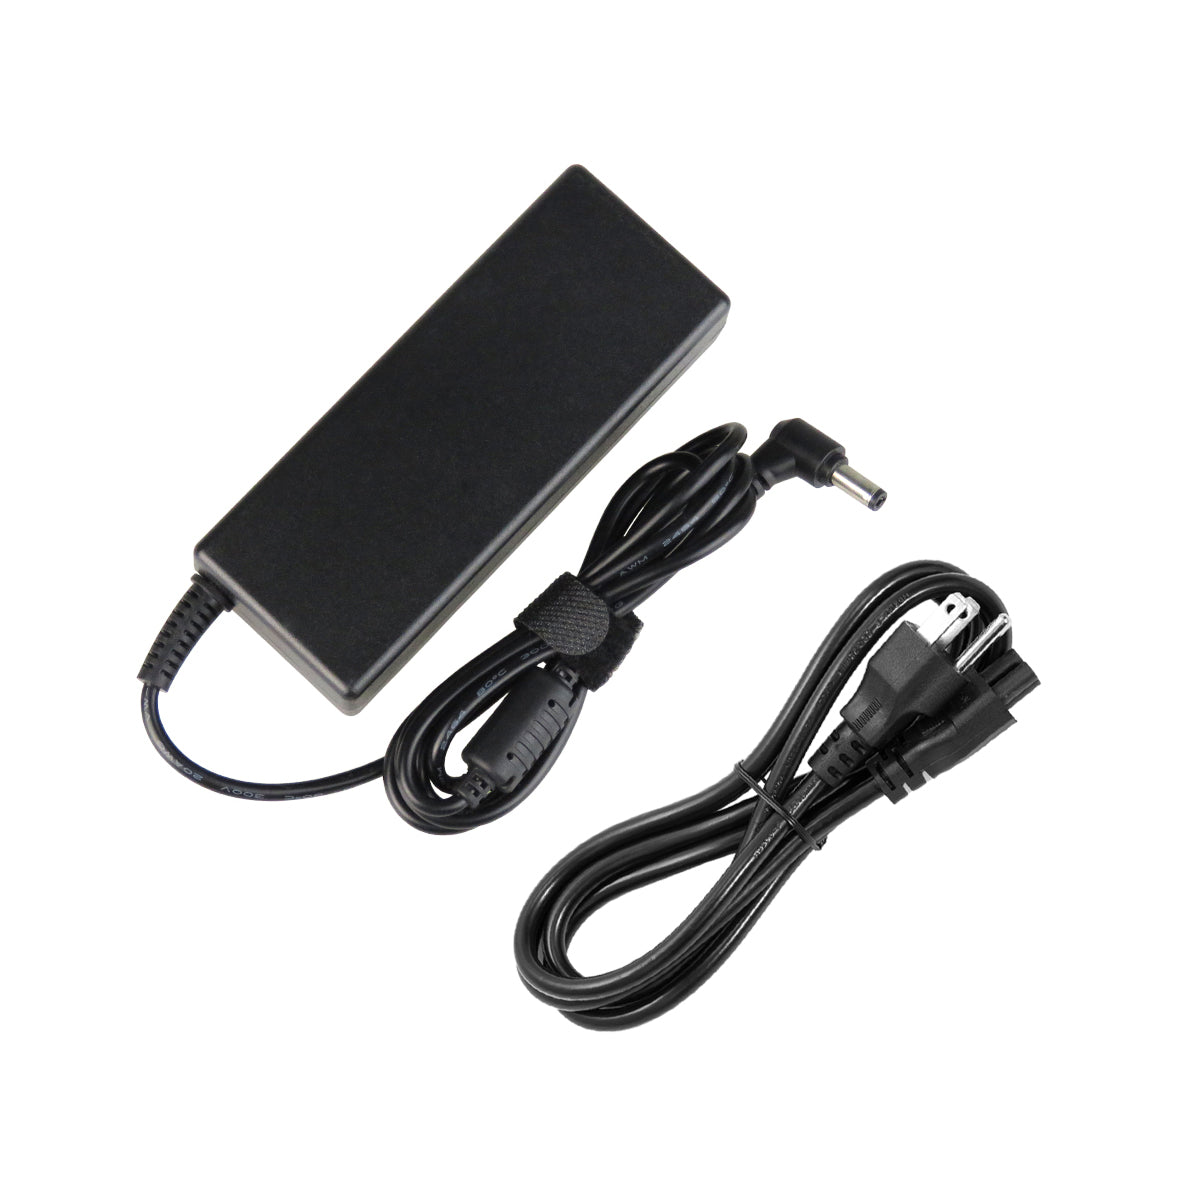 AC Adapter Charger for Toshiba Satellite c55t-a5222 Notebook.